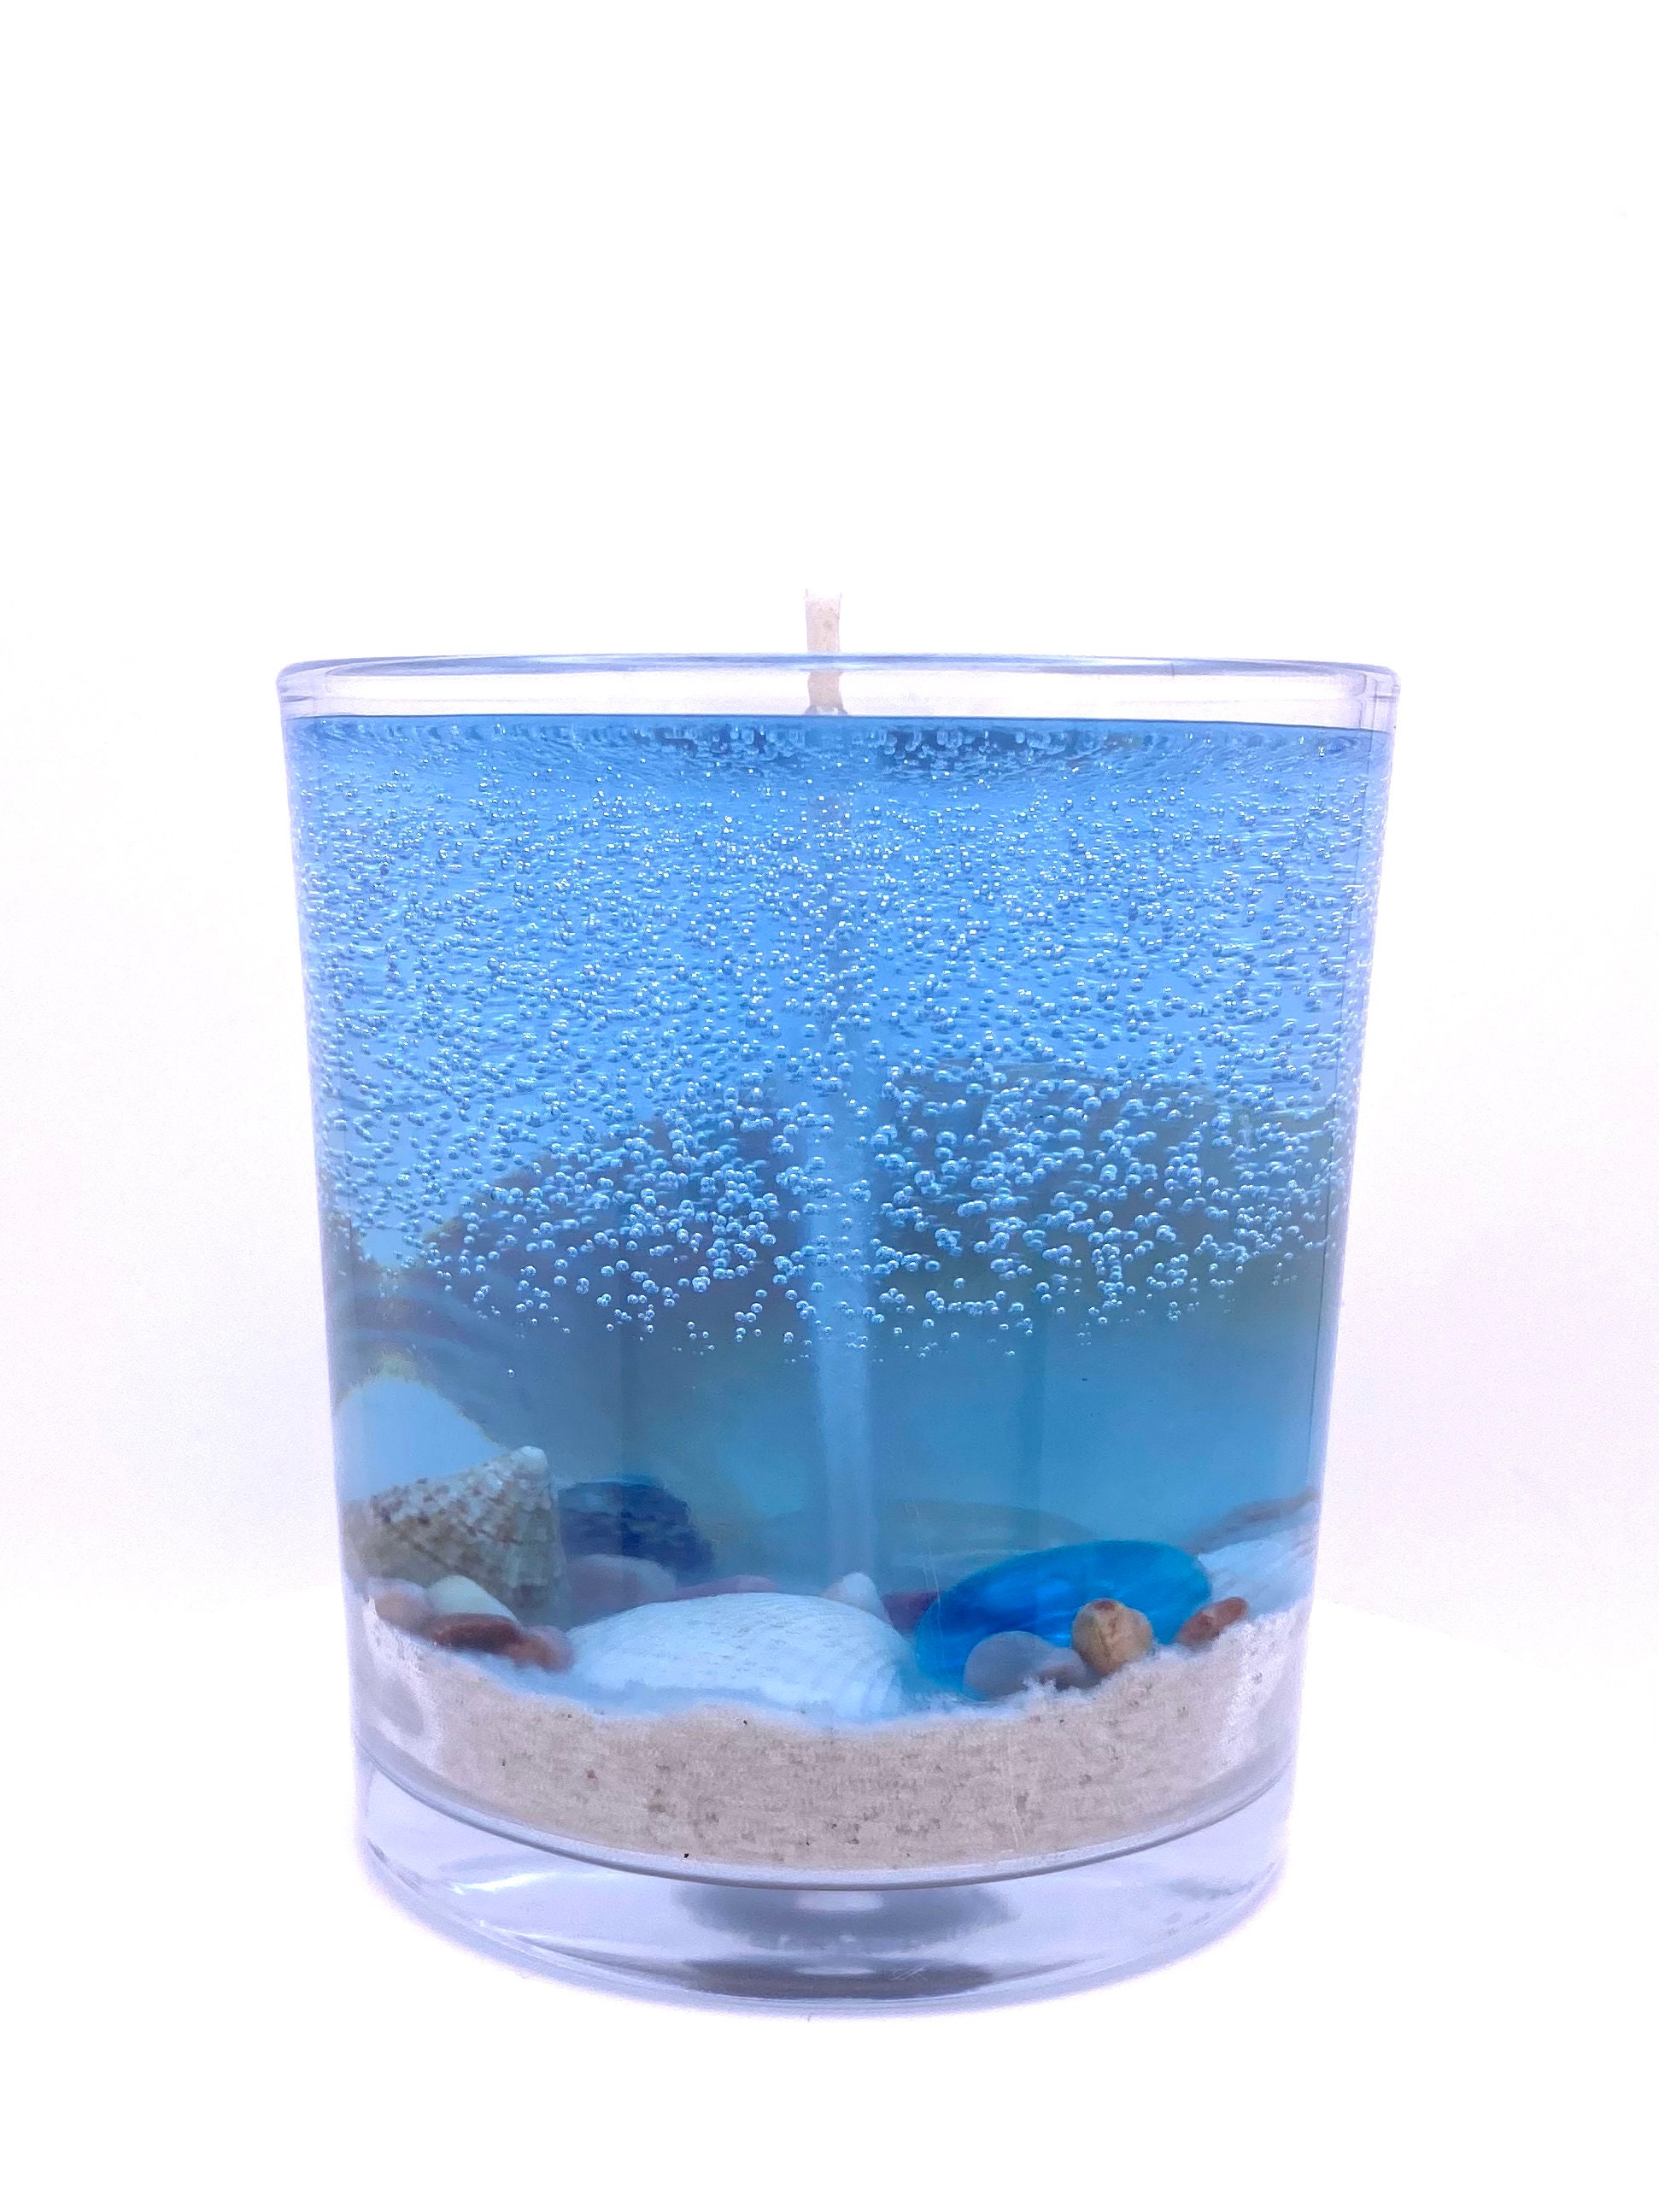 Scented Gel Wax Sea Candle Ocean Themed Candles Handmade and Eco-Friendly  Decorative Glass Body Relaxing and Stress Relief Candles for Home Bath  Decoration Wedding Party Favors & Gifts 7.7 Oz 